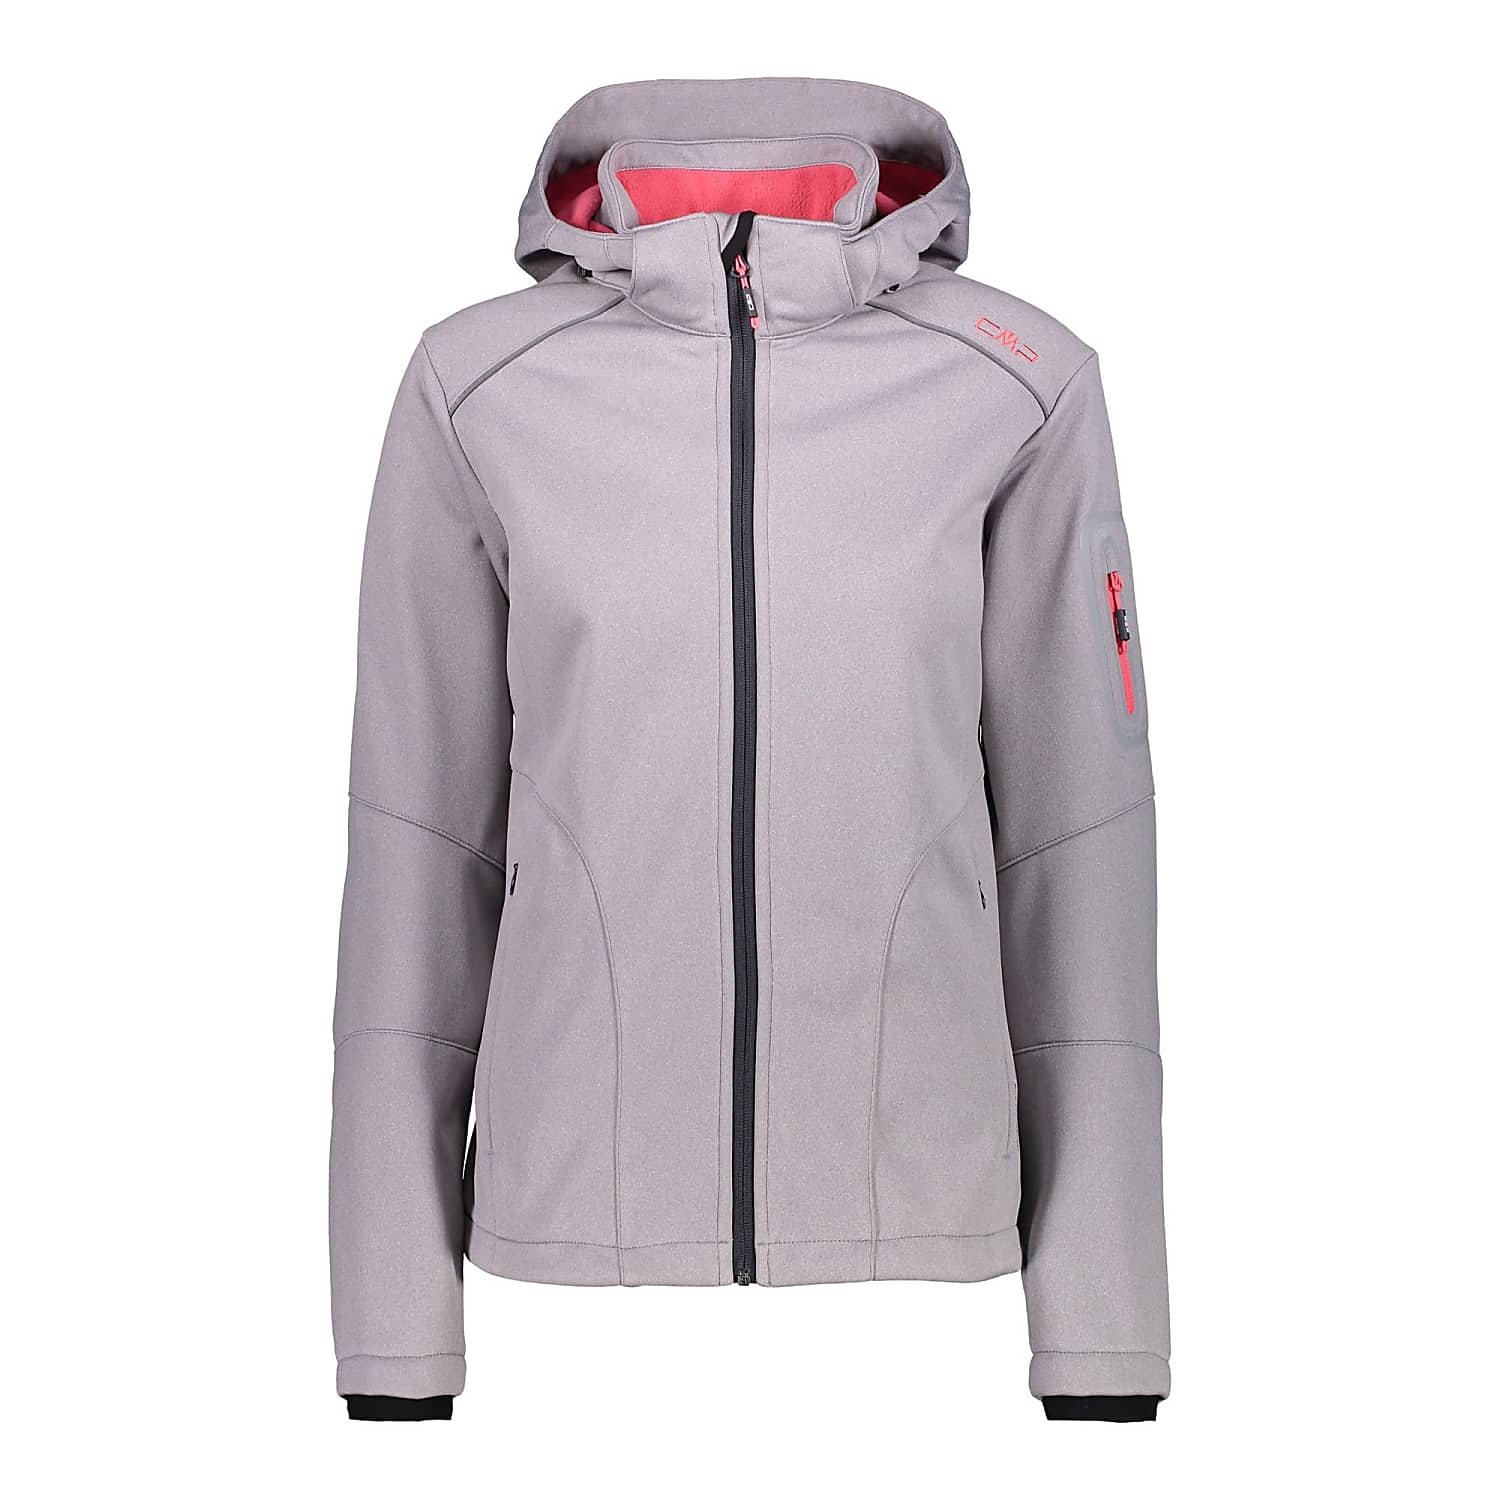 CMP W JACKET ZIP shipping and HOOD cheap Corallo Fast - Argento SOFTSHELL, Mel. 